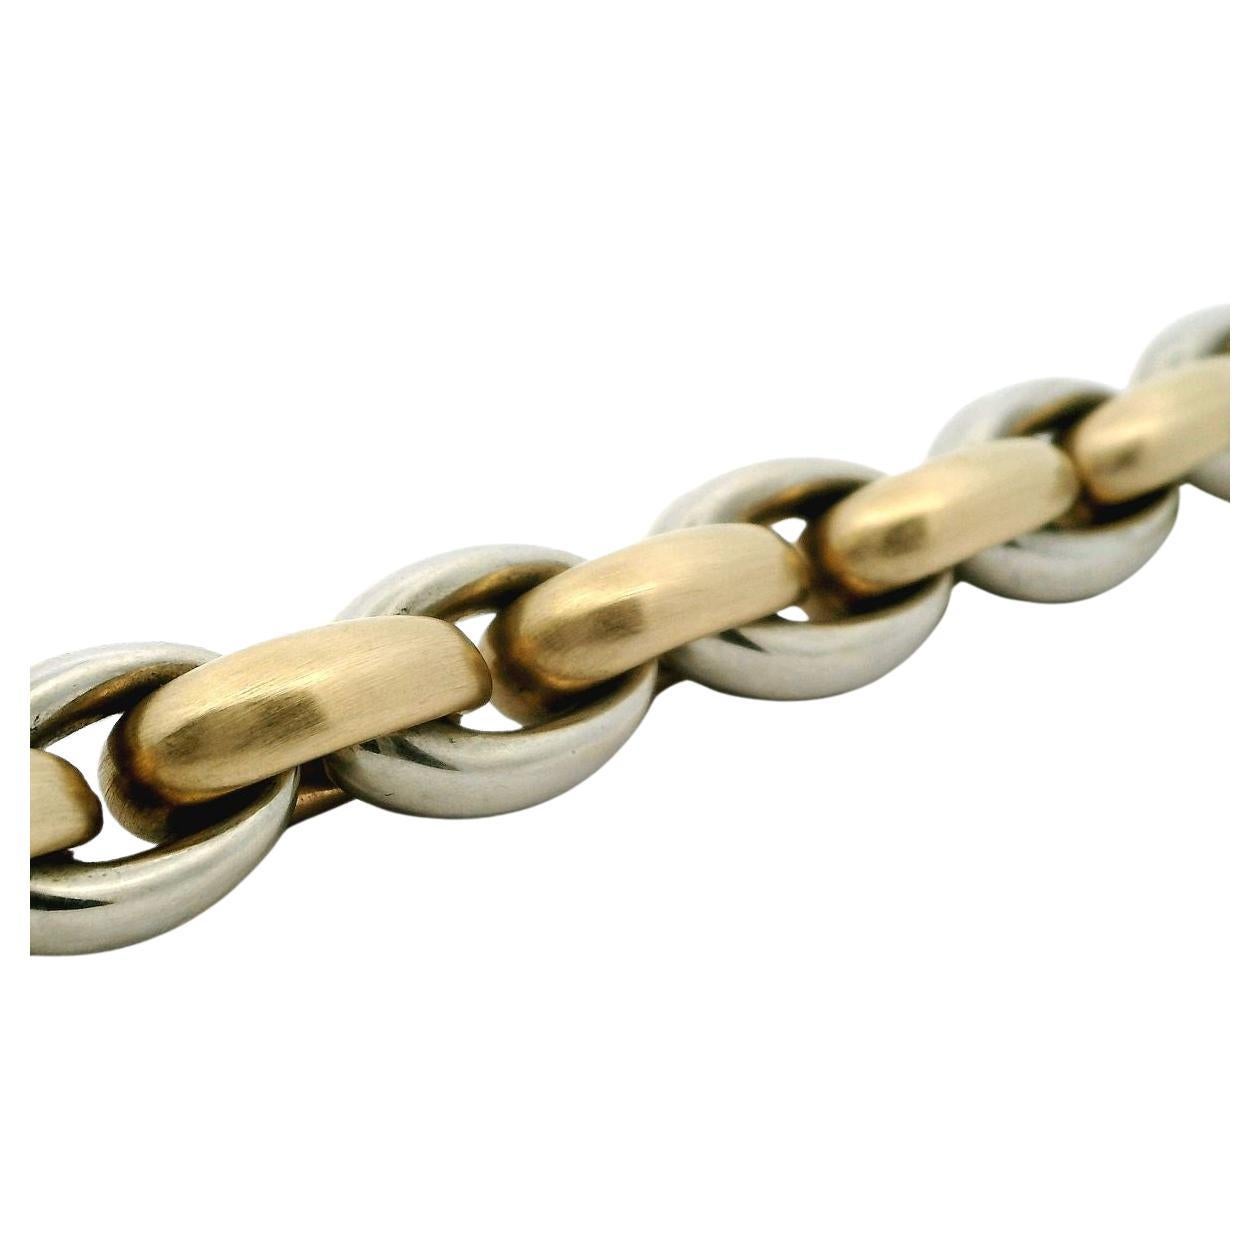 Dress up your off-duty looks with our Italian made 14 karat two-tone yellow and white gold chunky oval link bracelet offered by Alex & Co. This classic and timeless Circa 1980's piece features alternating white high polished and yellow satin finish